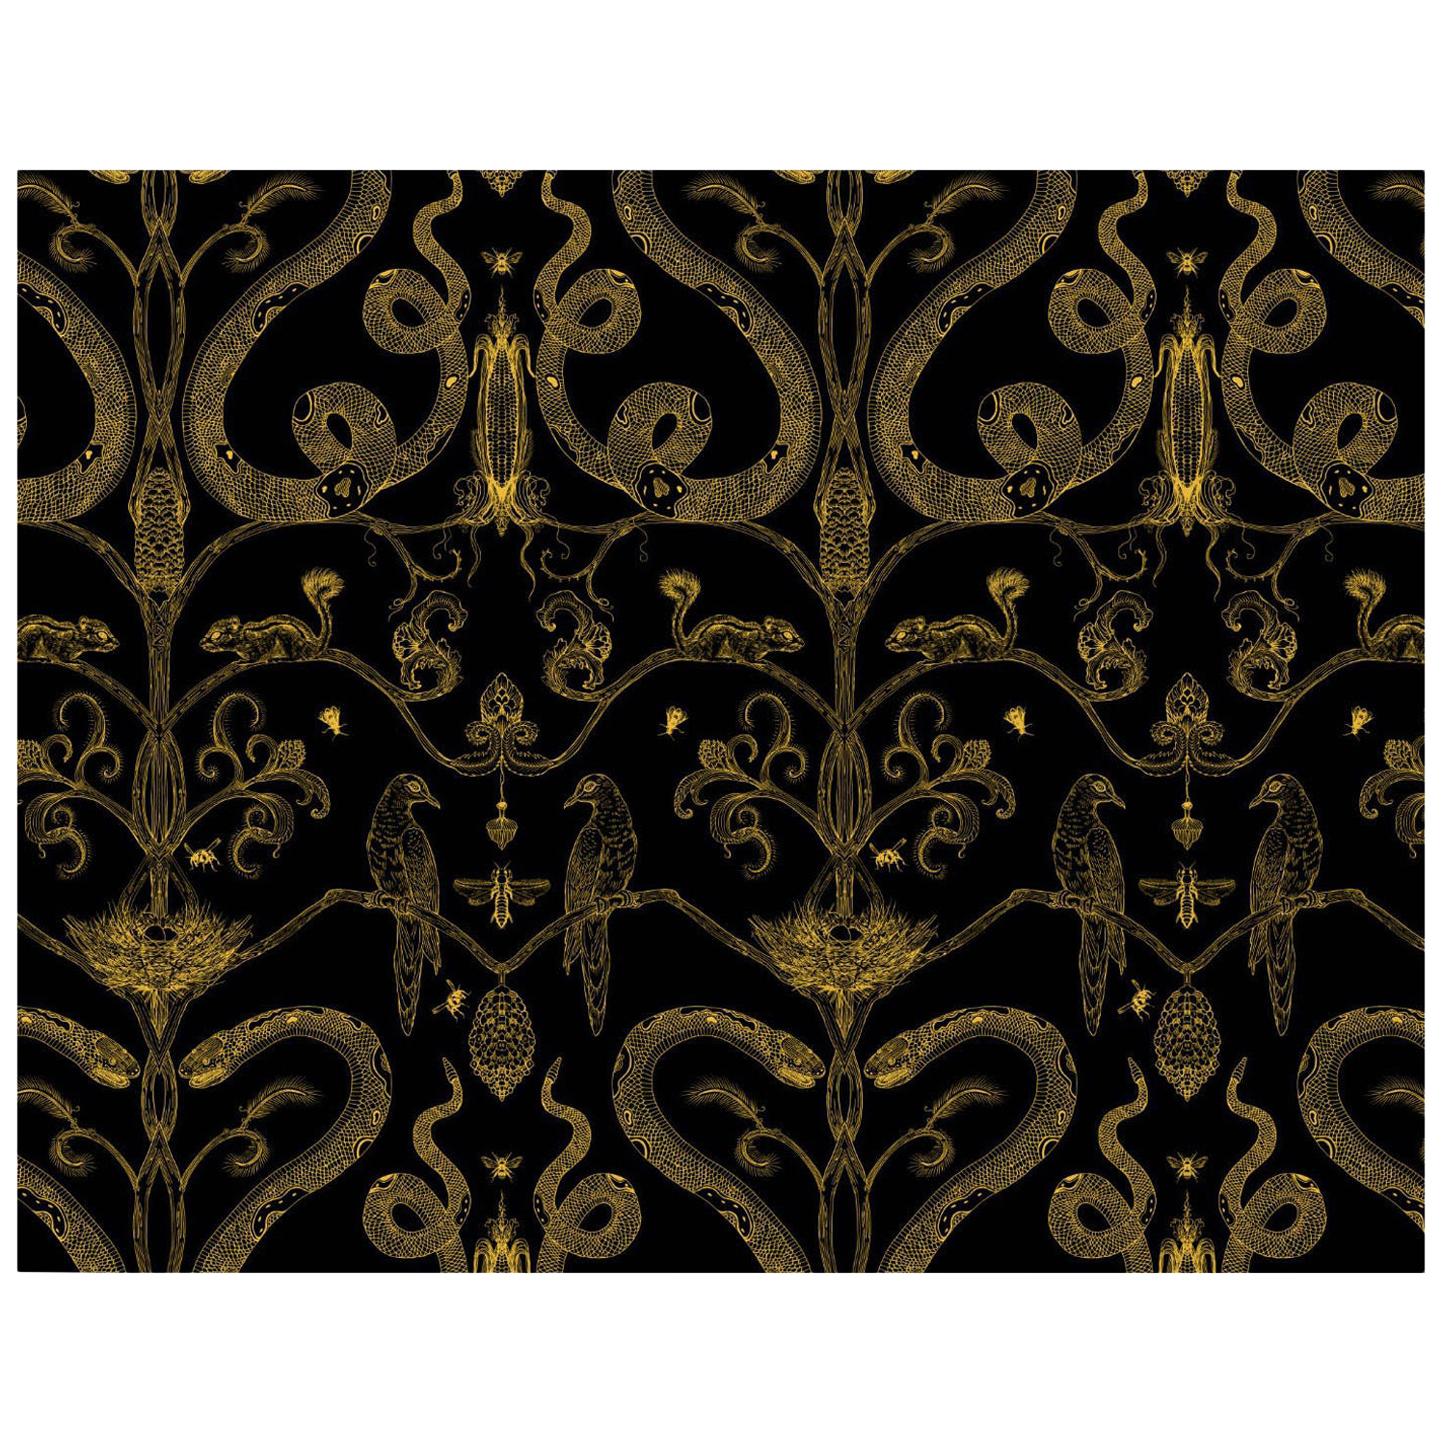 Snake Party in Gold on Black-Smooth Wallpaper with Hand Drawn Animals For Sale